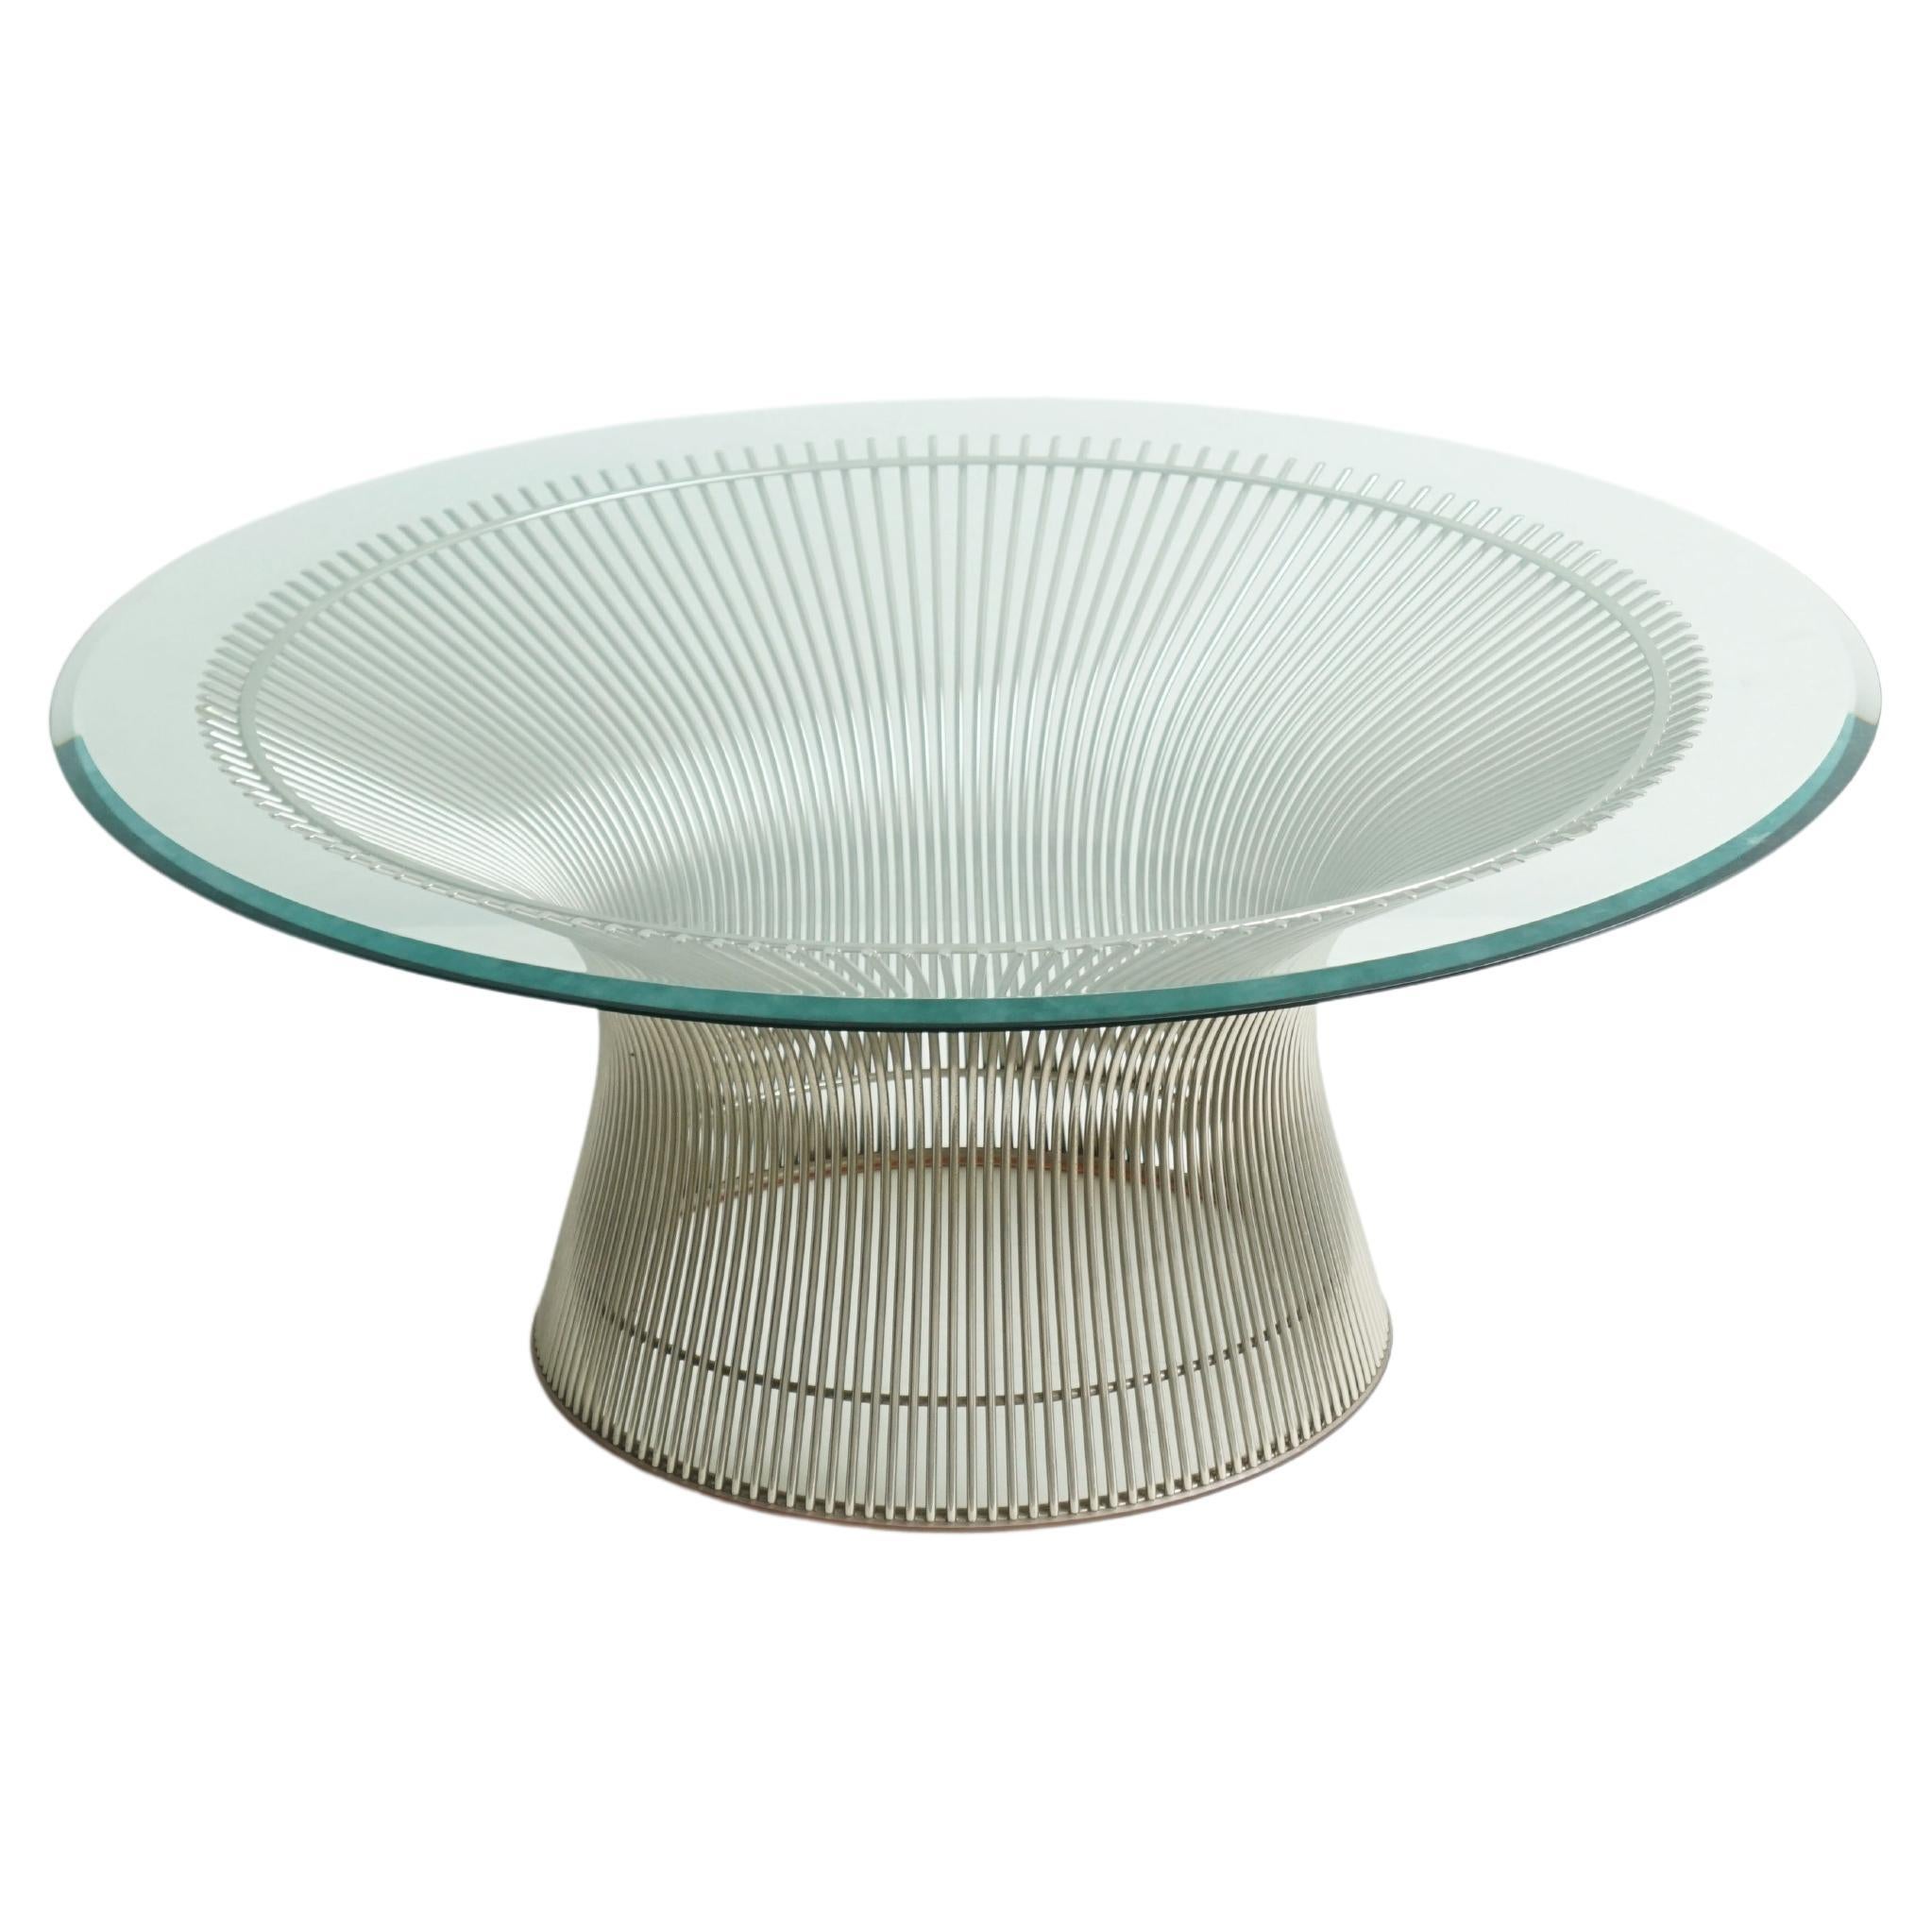 Warren Platner Coffee Table for Knoll in Nickel with Glass Top